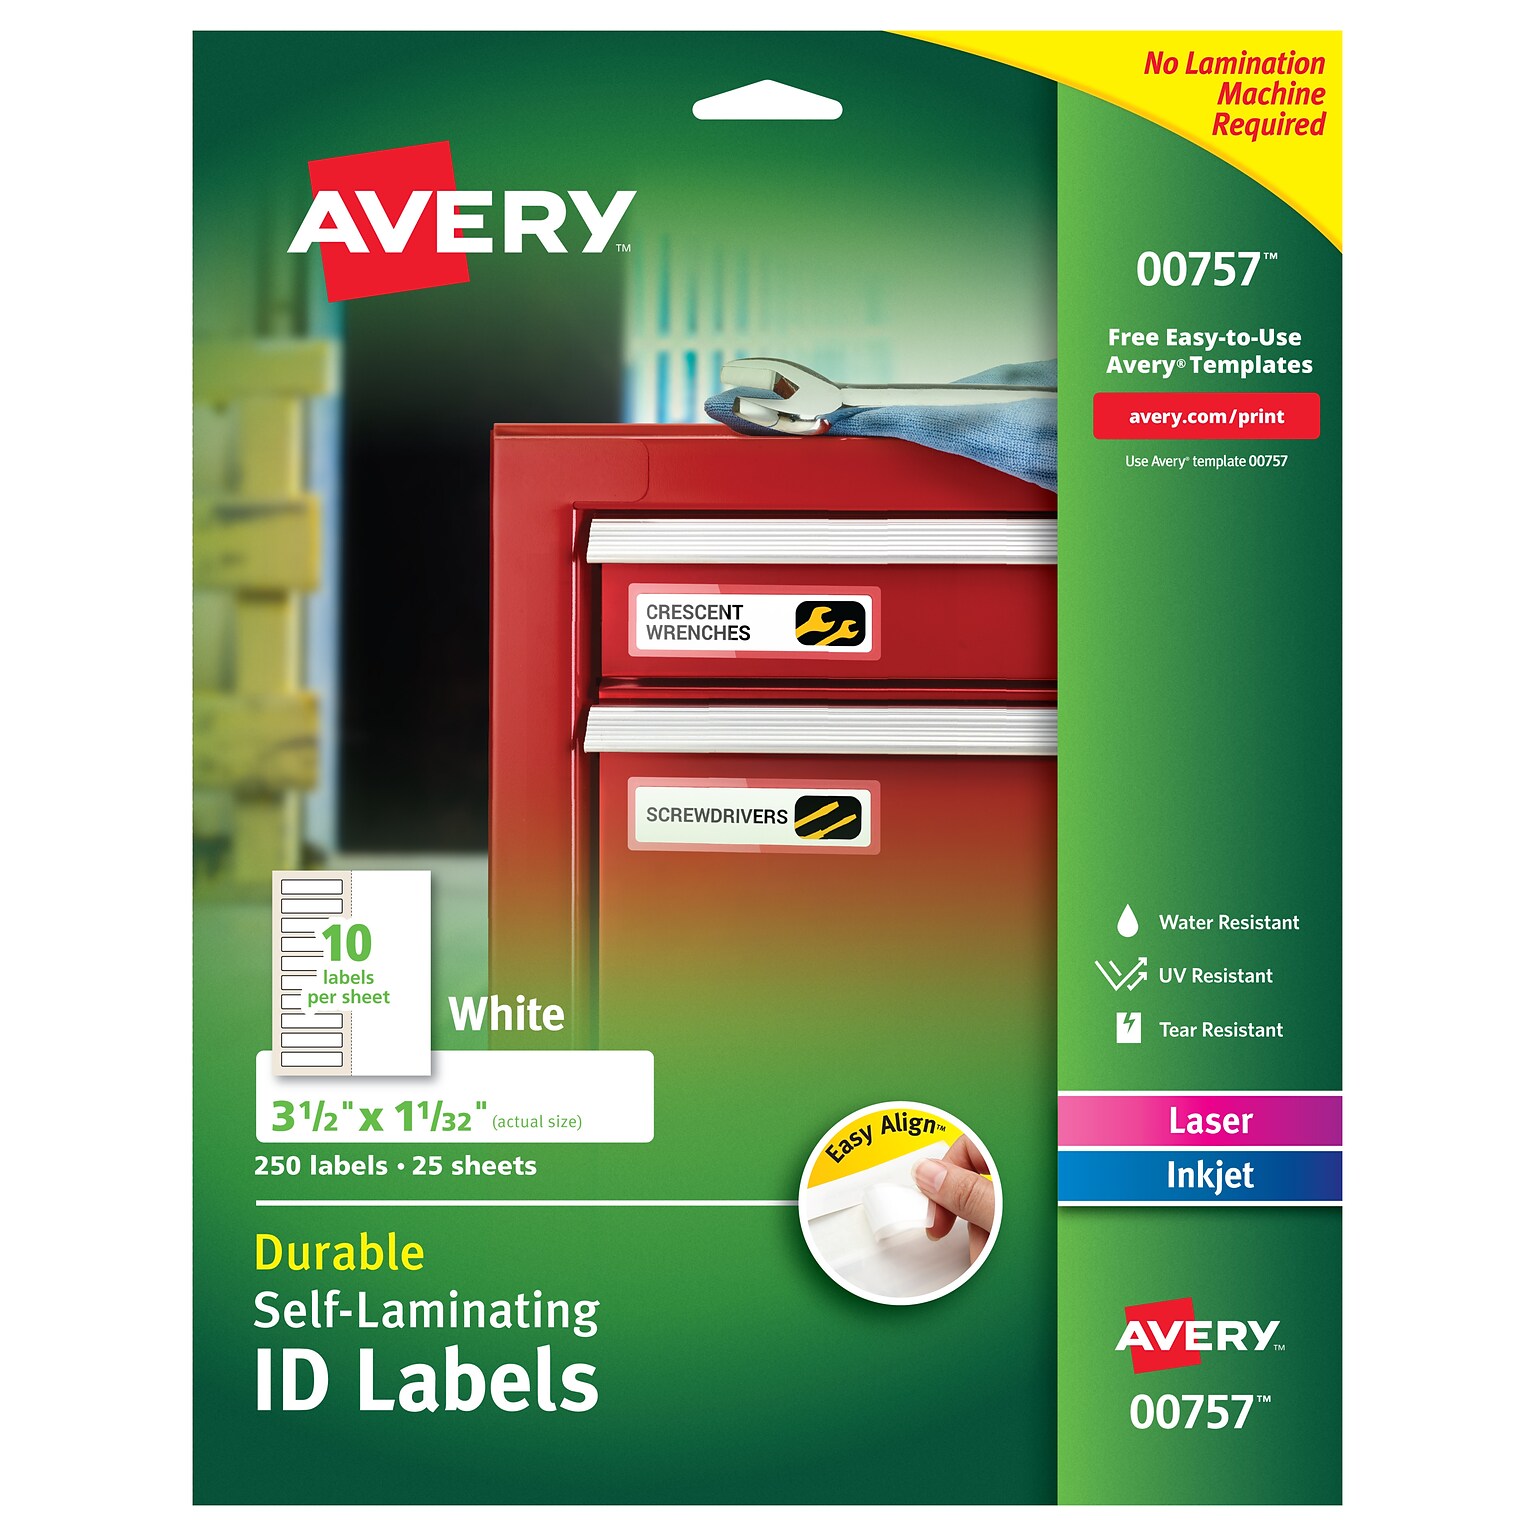 Avery Laser/Inkjet Self-Laminating ID Labels, 1-1/32 x 3-1/2, White, 10 Labels/Sheet, 25 Sheets/Pack, 250 Labels/Pack (00757)